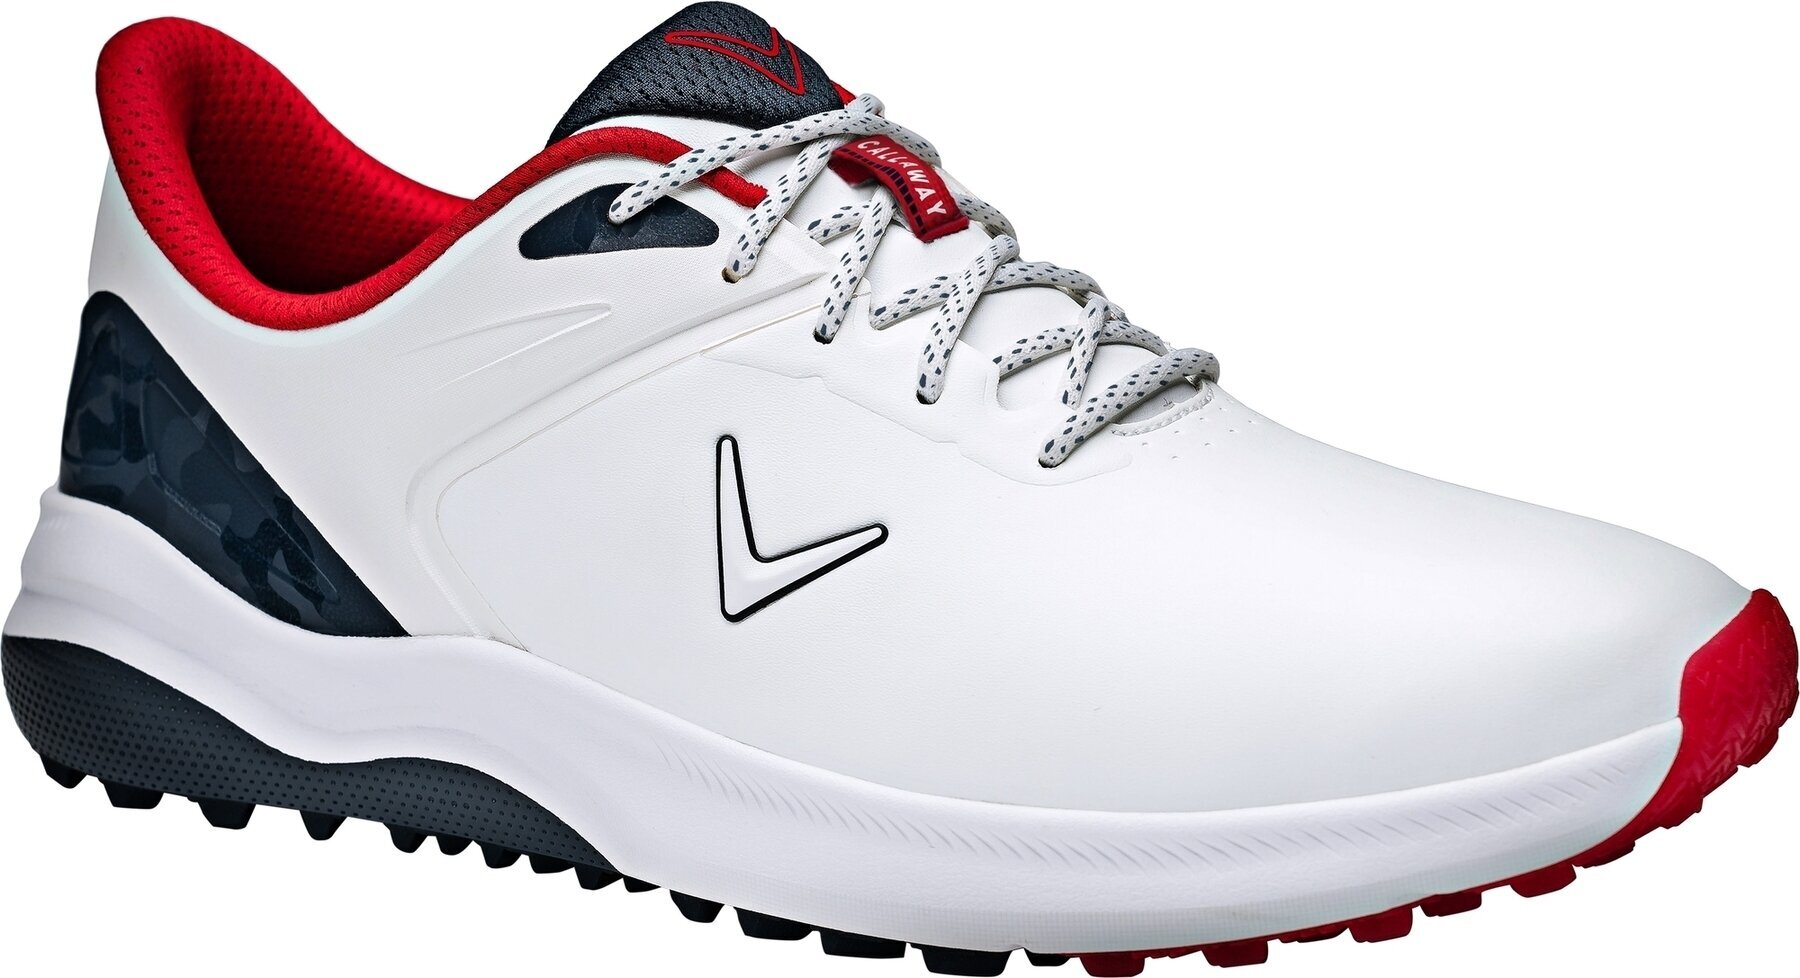 Men's golf shoes Callaway Lazer Mens Golf Shoes White/Navy/Red 42